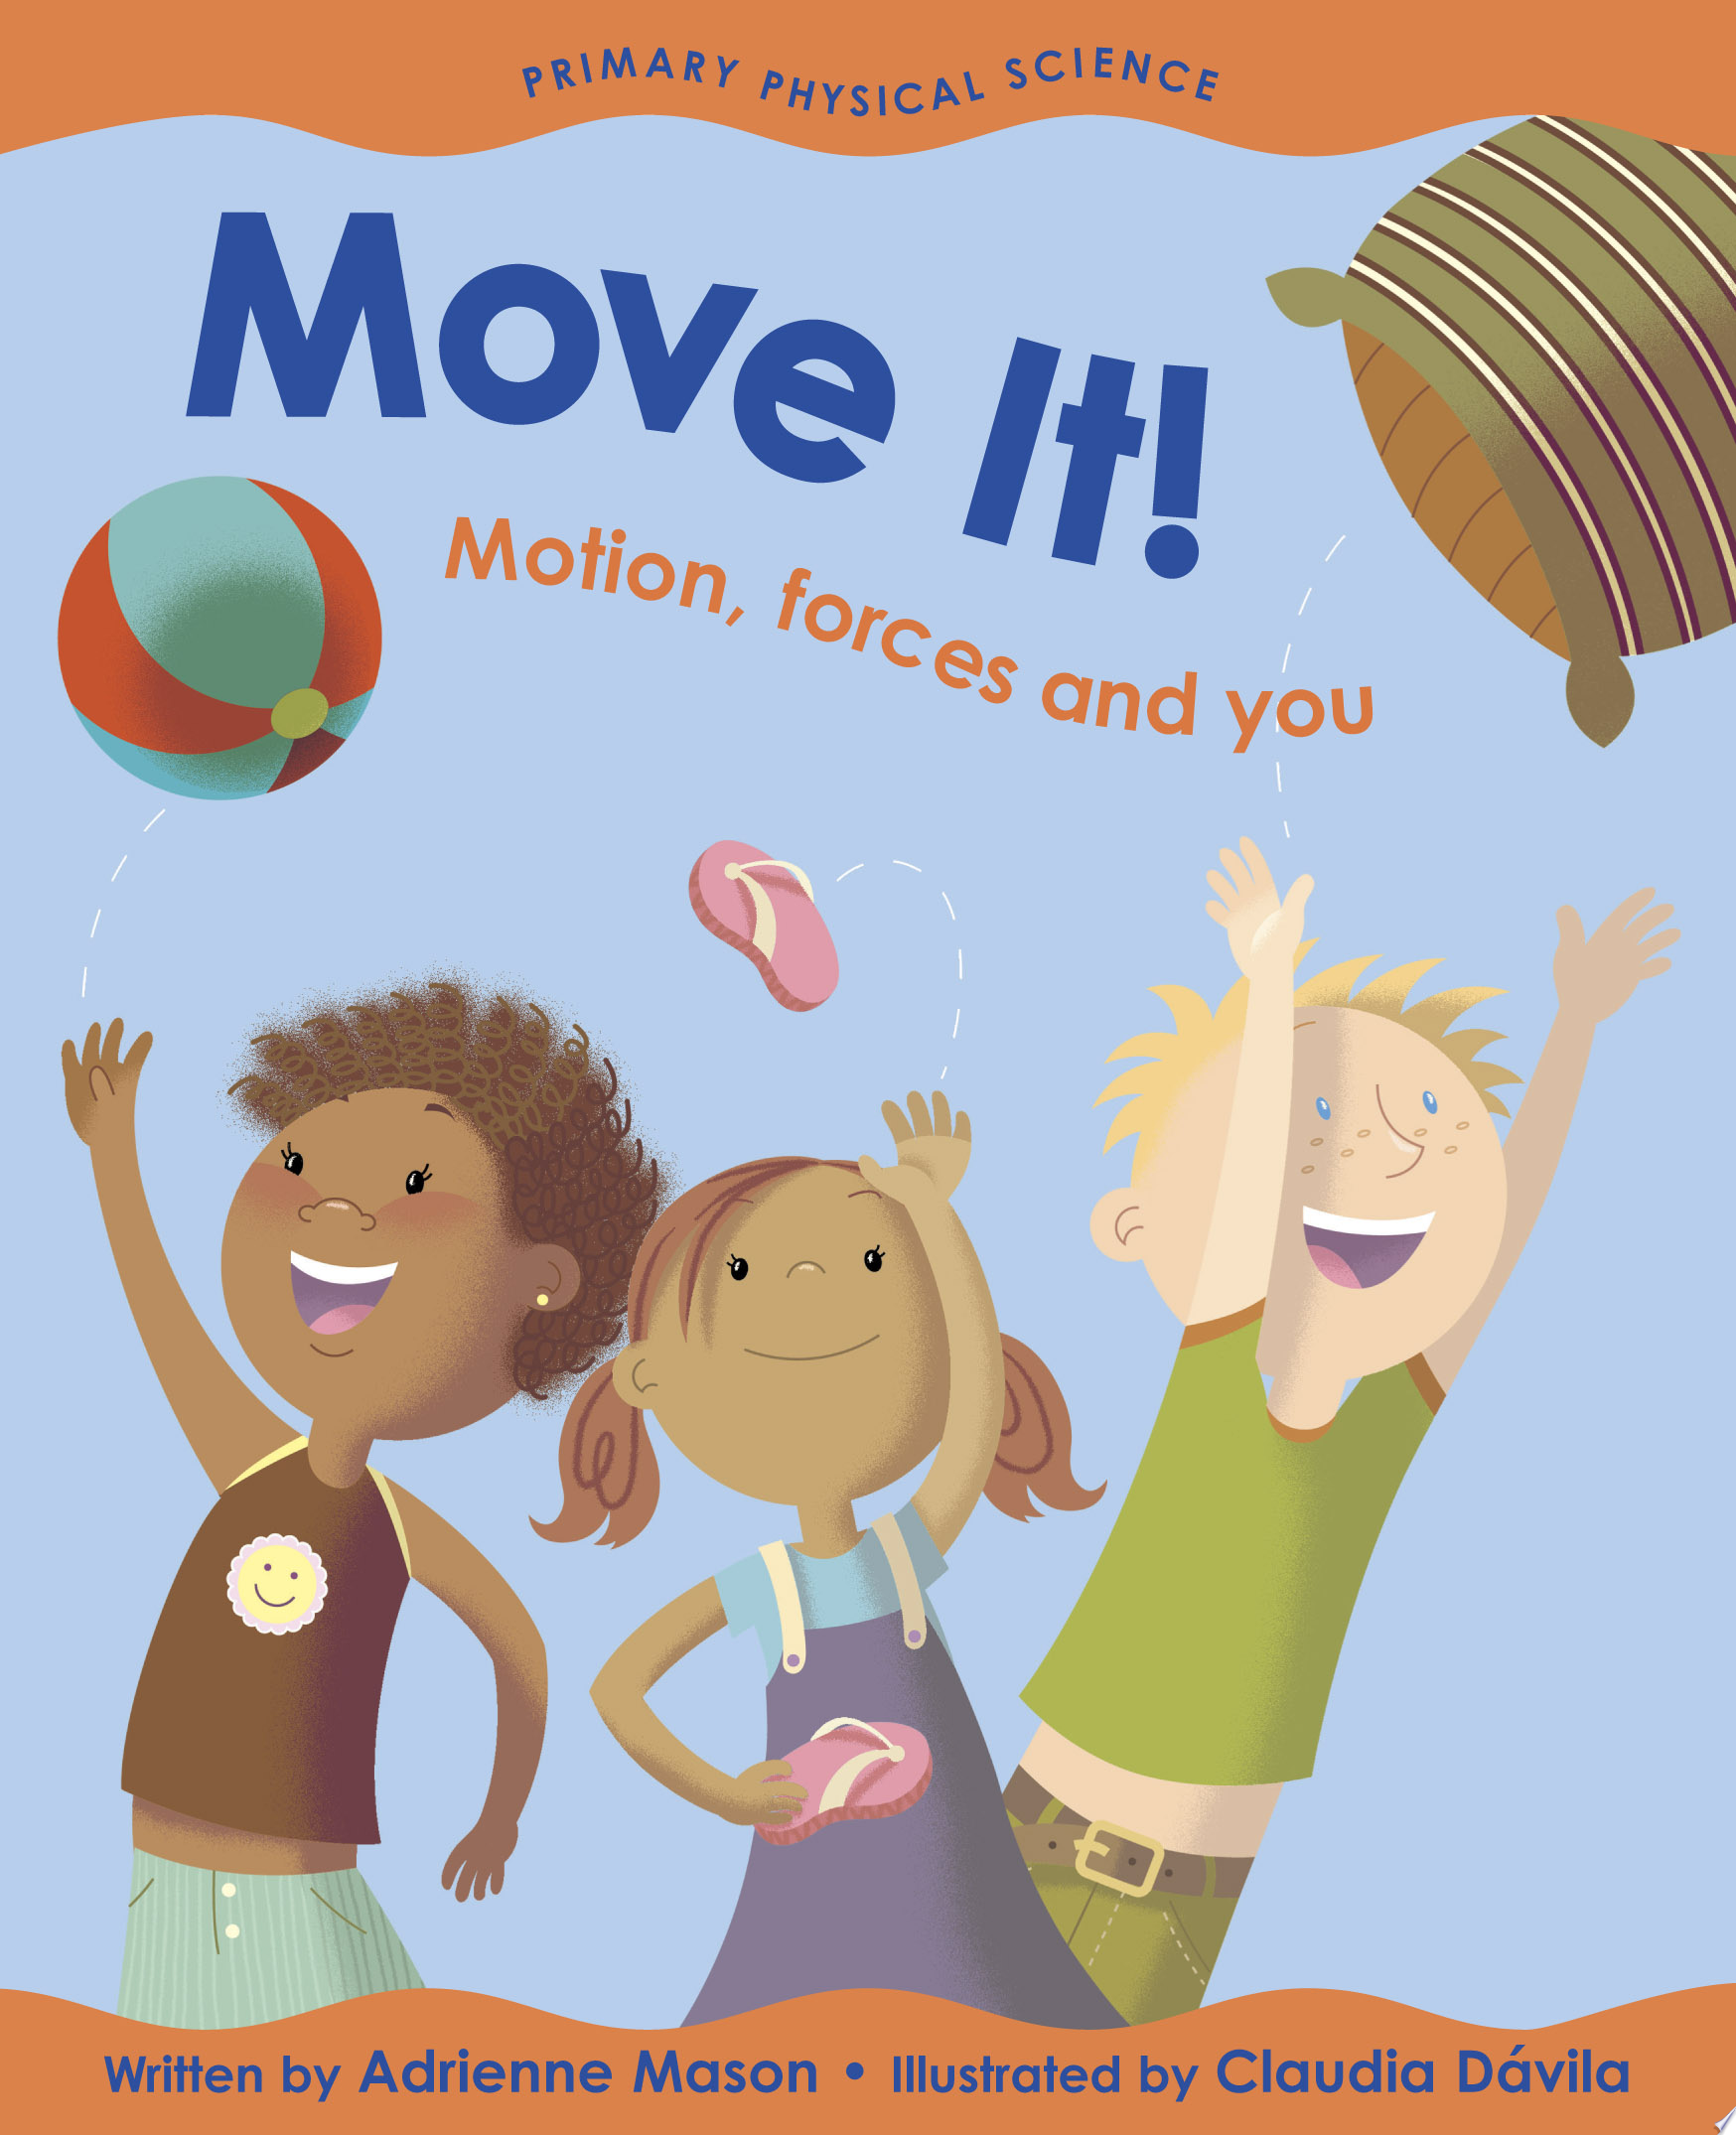 Image for "Move It!"